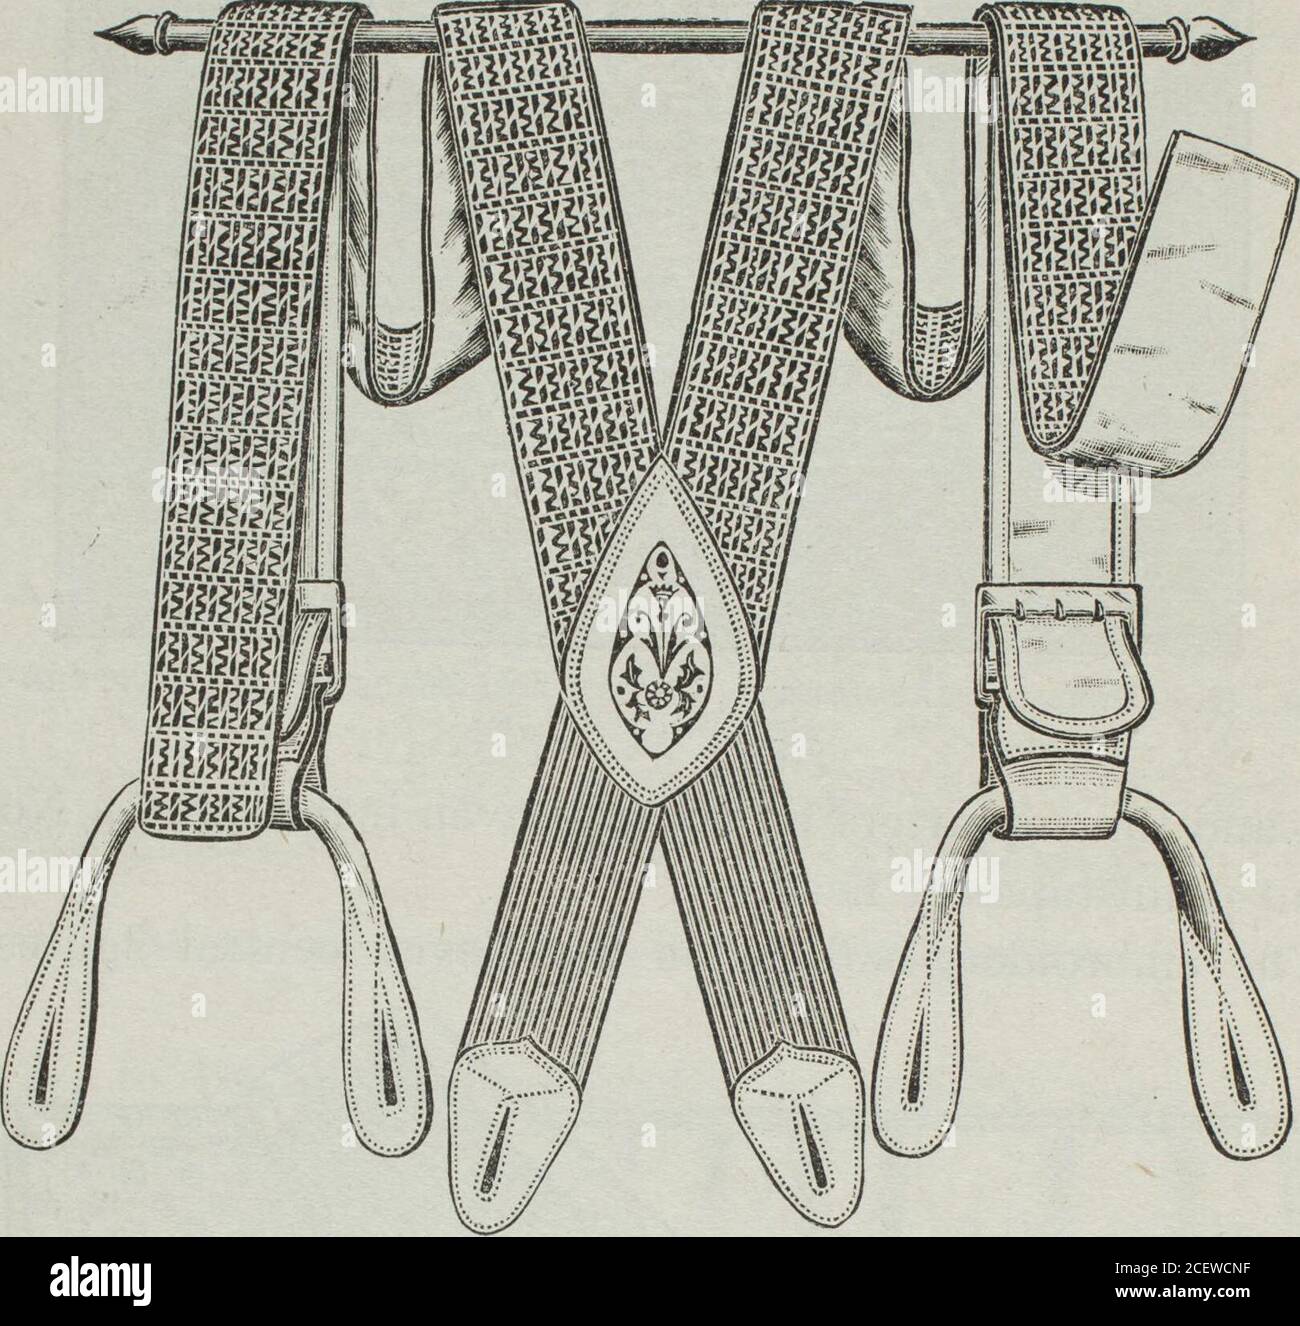 Florence home needle-work. Fig. 49. —Showing Construction of Suspenders. Detail of Fig. 50